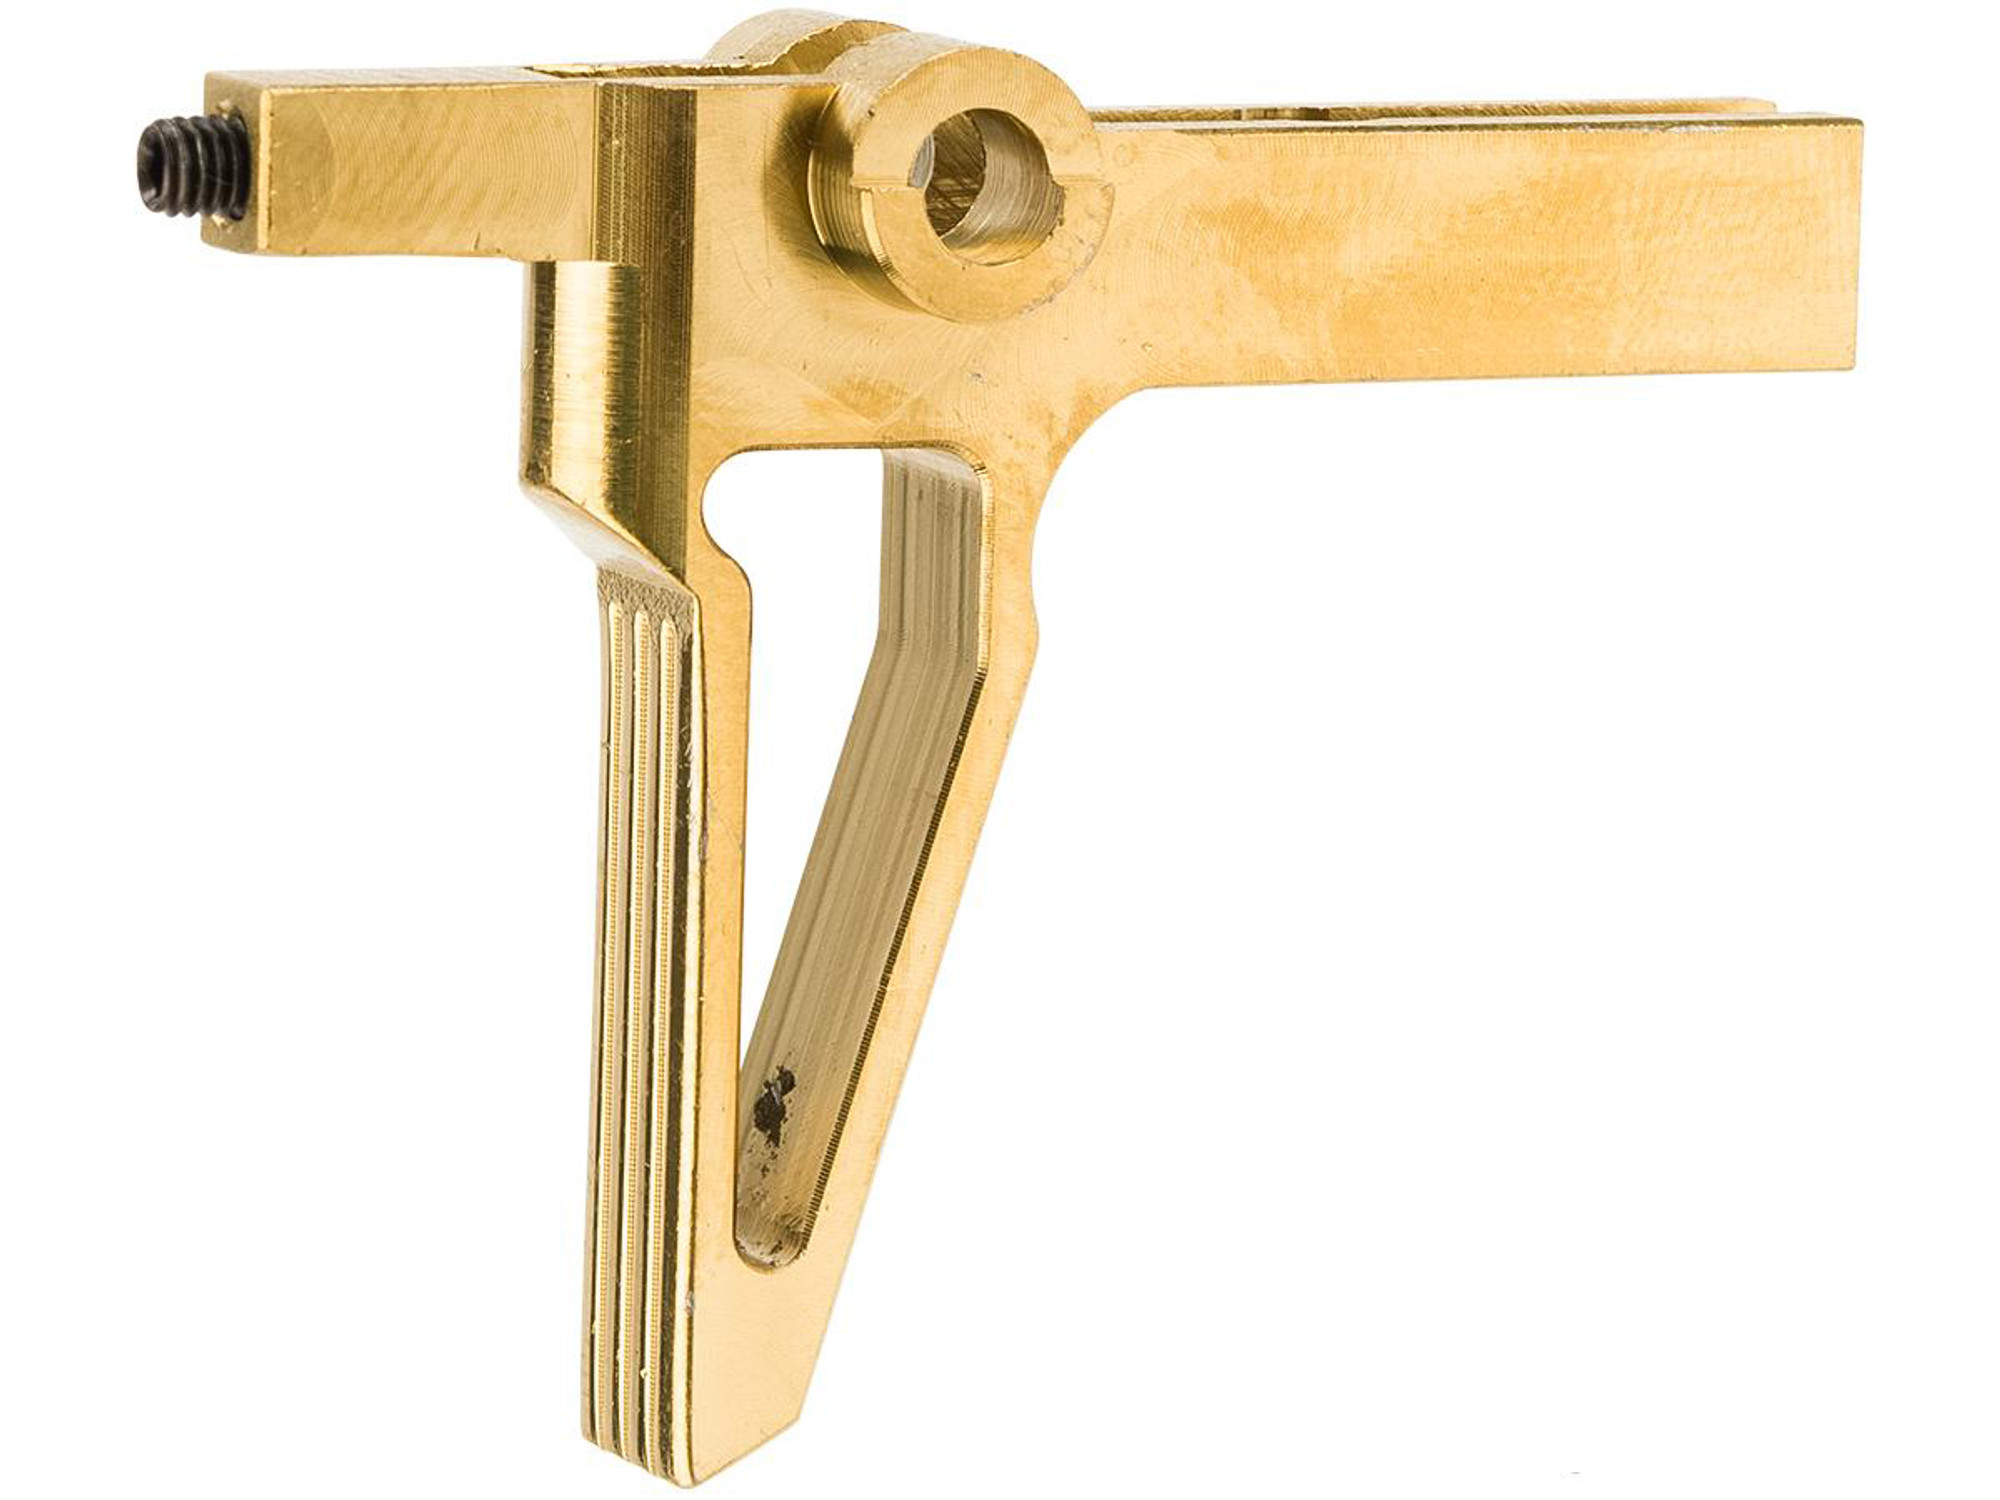 G&P Stainless Steel Flat Face Trigger for G&P / WA Gas Blowback M4 Airsoft Rifles (Color: Gold)